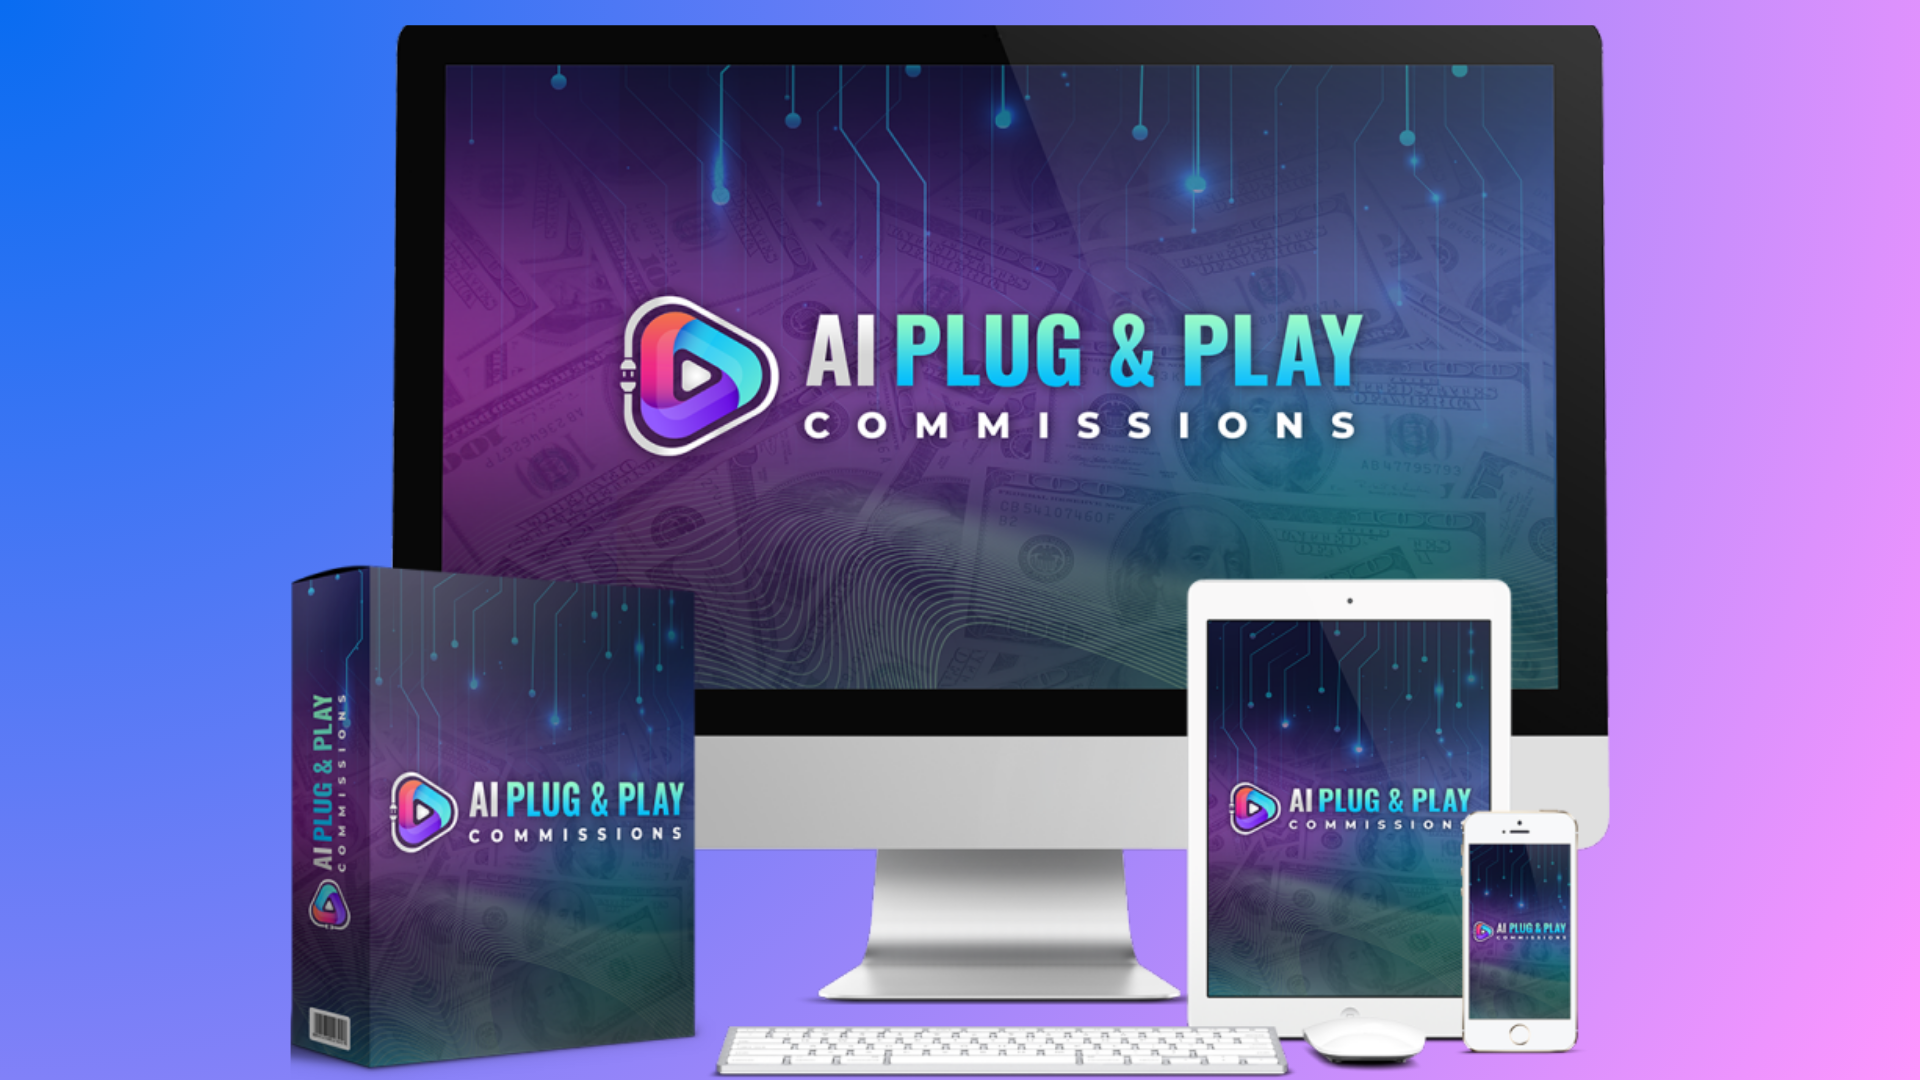 AI Plug & Play Commissions Review